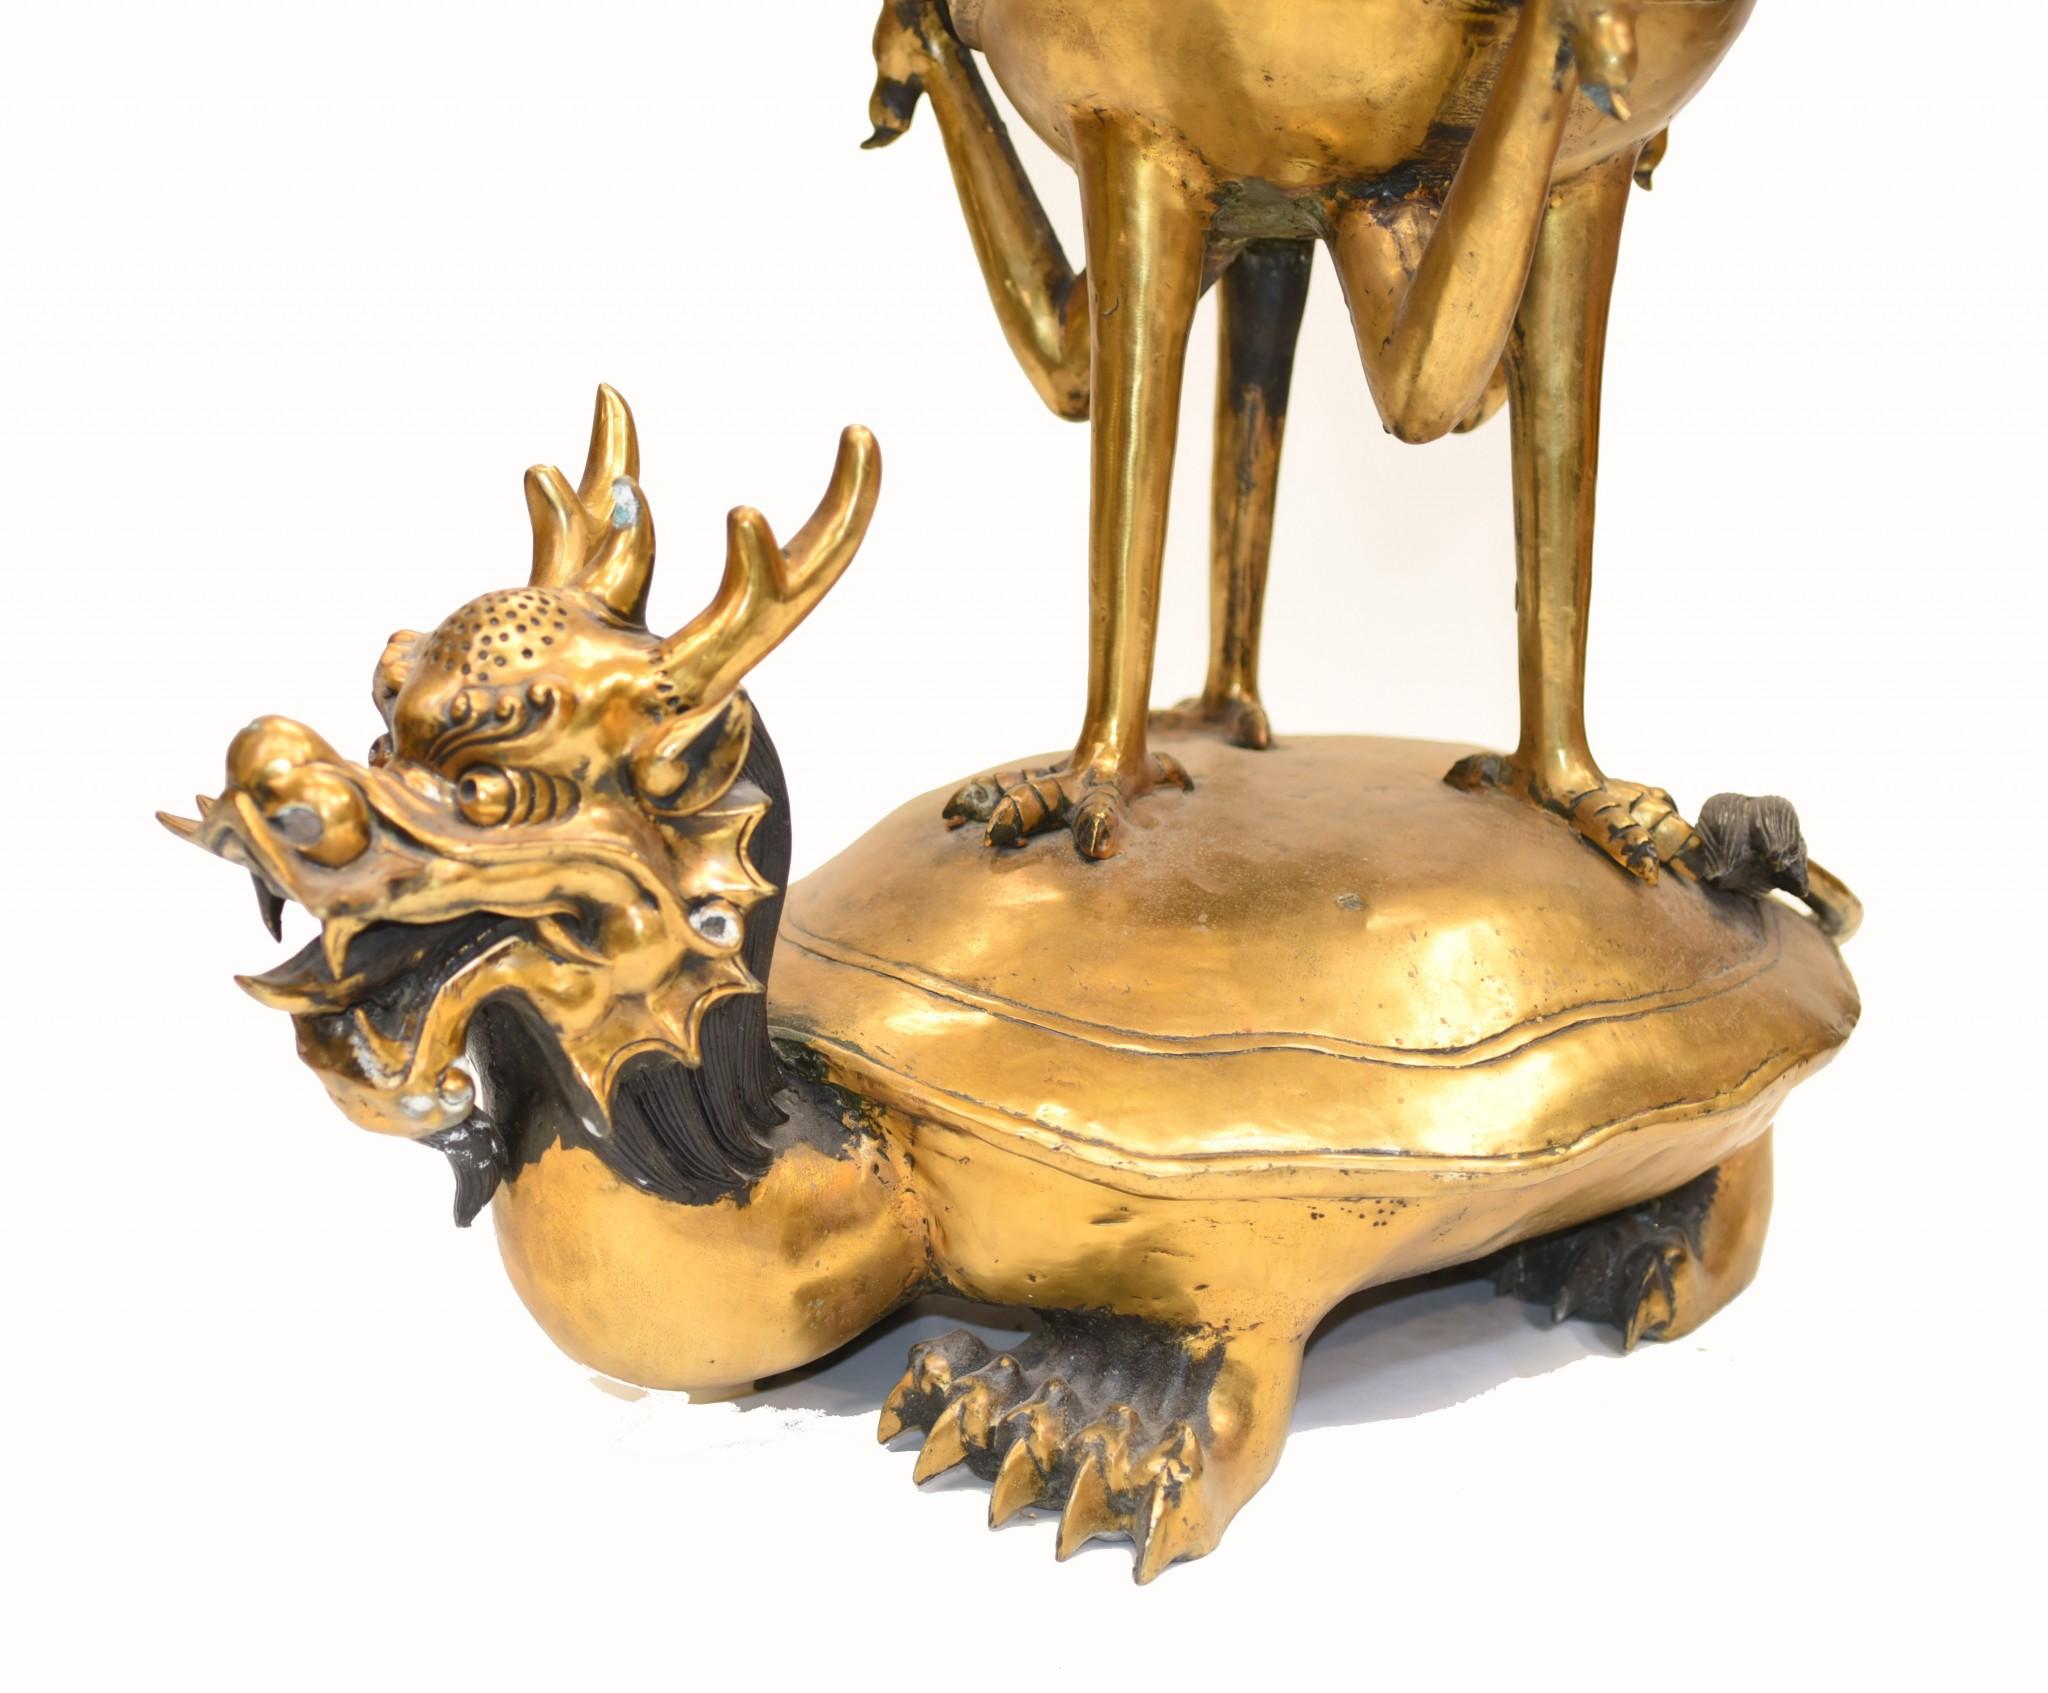 - Quirky bronze Chinese temple incense burner
- In the shape of a dragon turtle creature out of which sprouts the cranes
- Good size at over three feet tall - 96 cm
- Would have probably originally worked in a temple
- Great patina to the